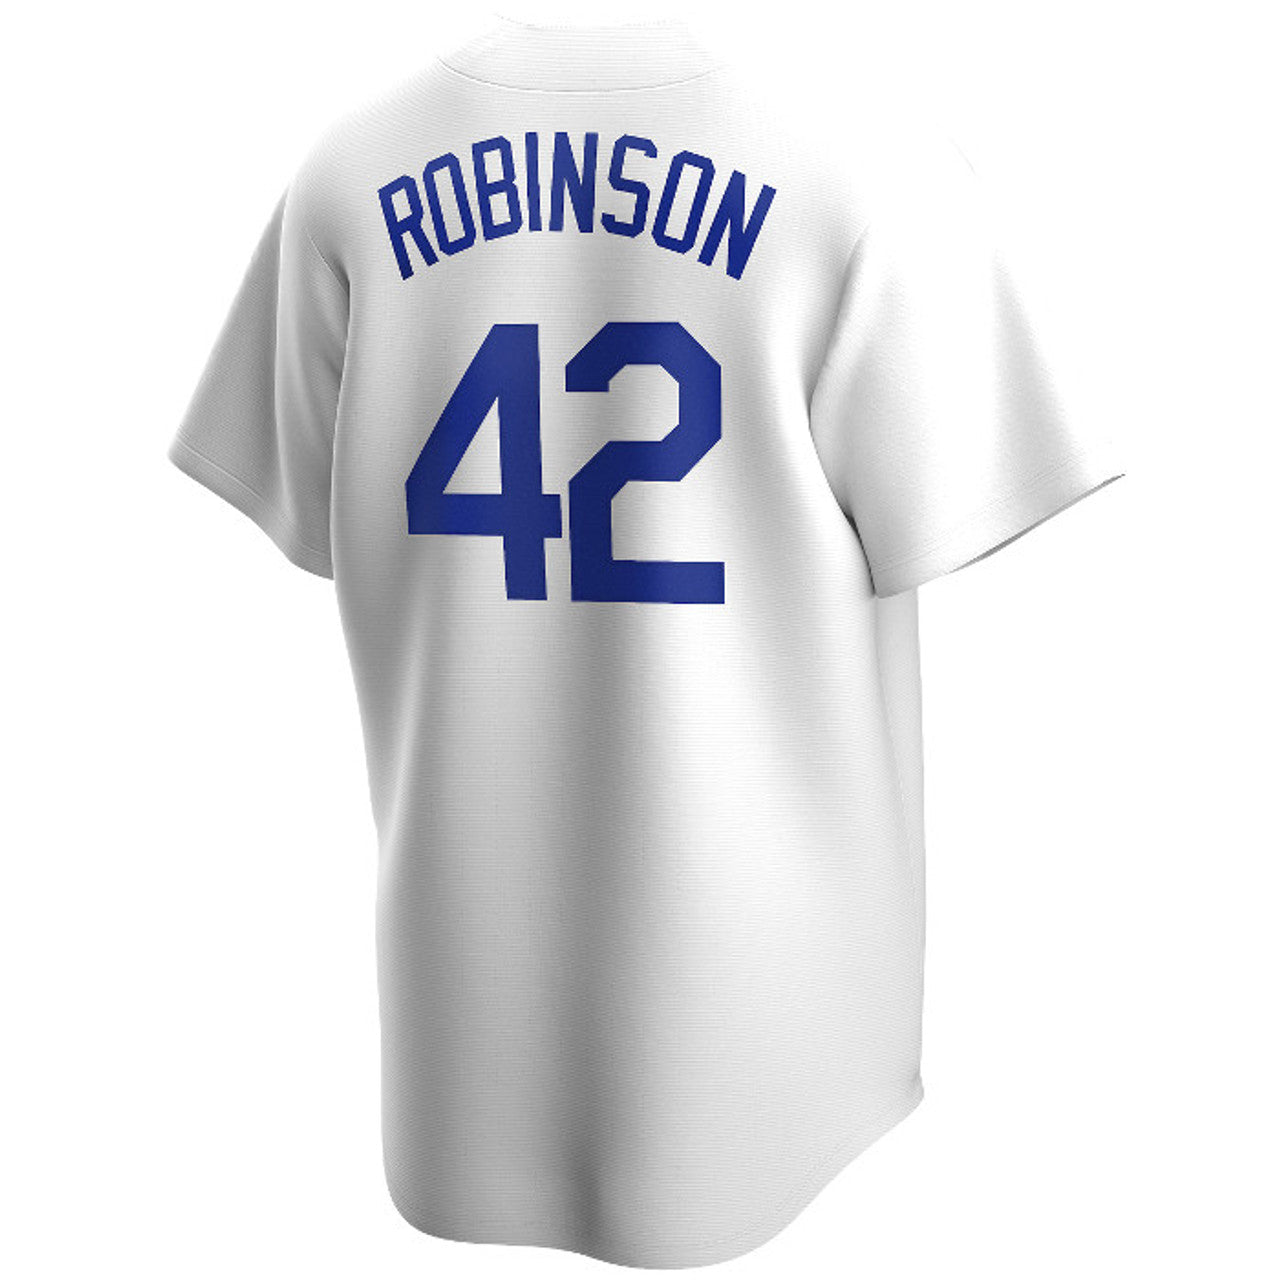 Men's Nike Jackie Robinson White Brooklyn Dodgers Home Cooperstown Collection Player Jersey